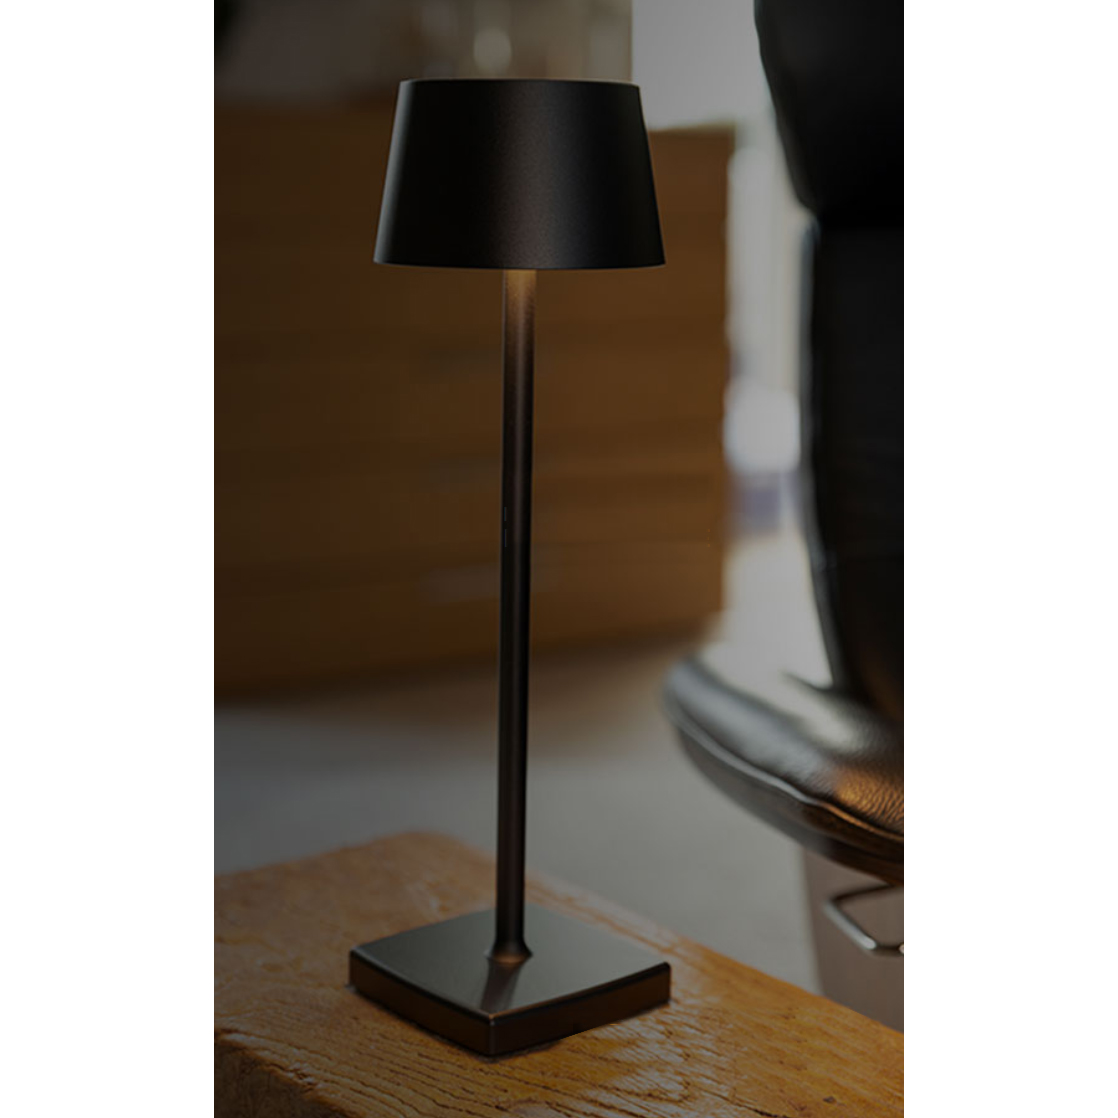 Orange One ingenious rechargeable LED table lamp portable, dimmable - black